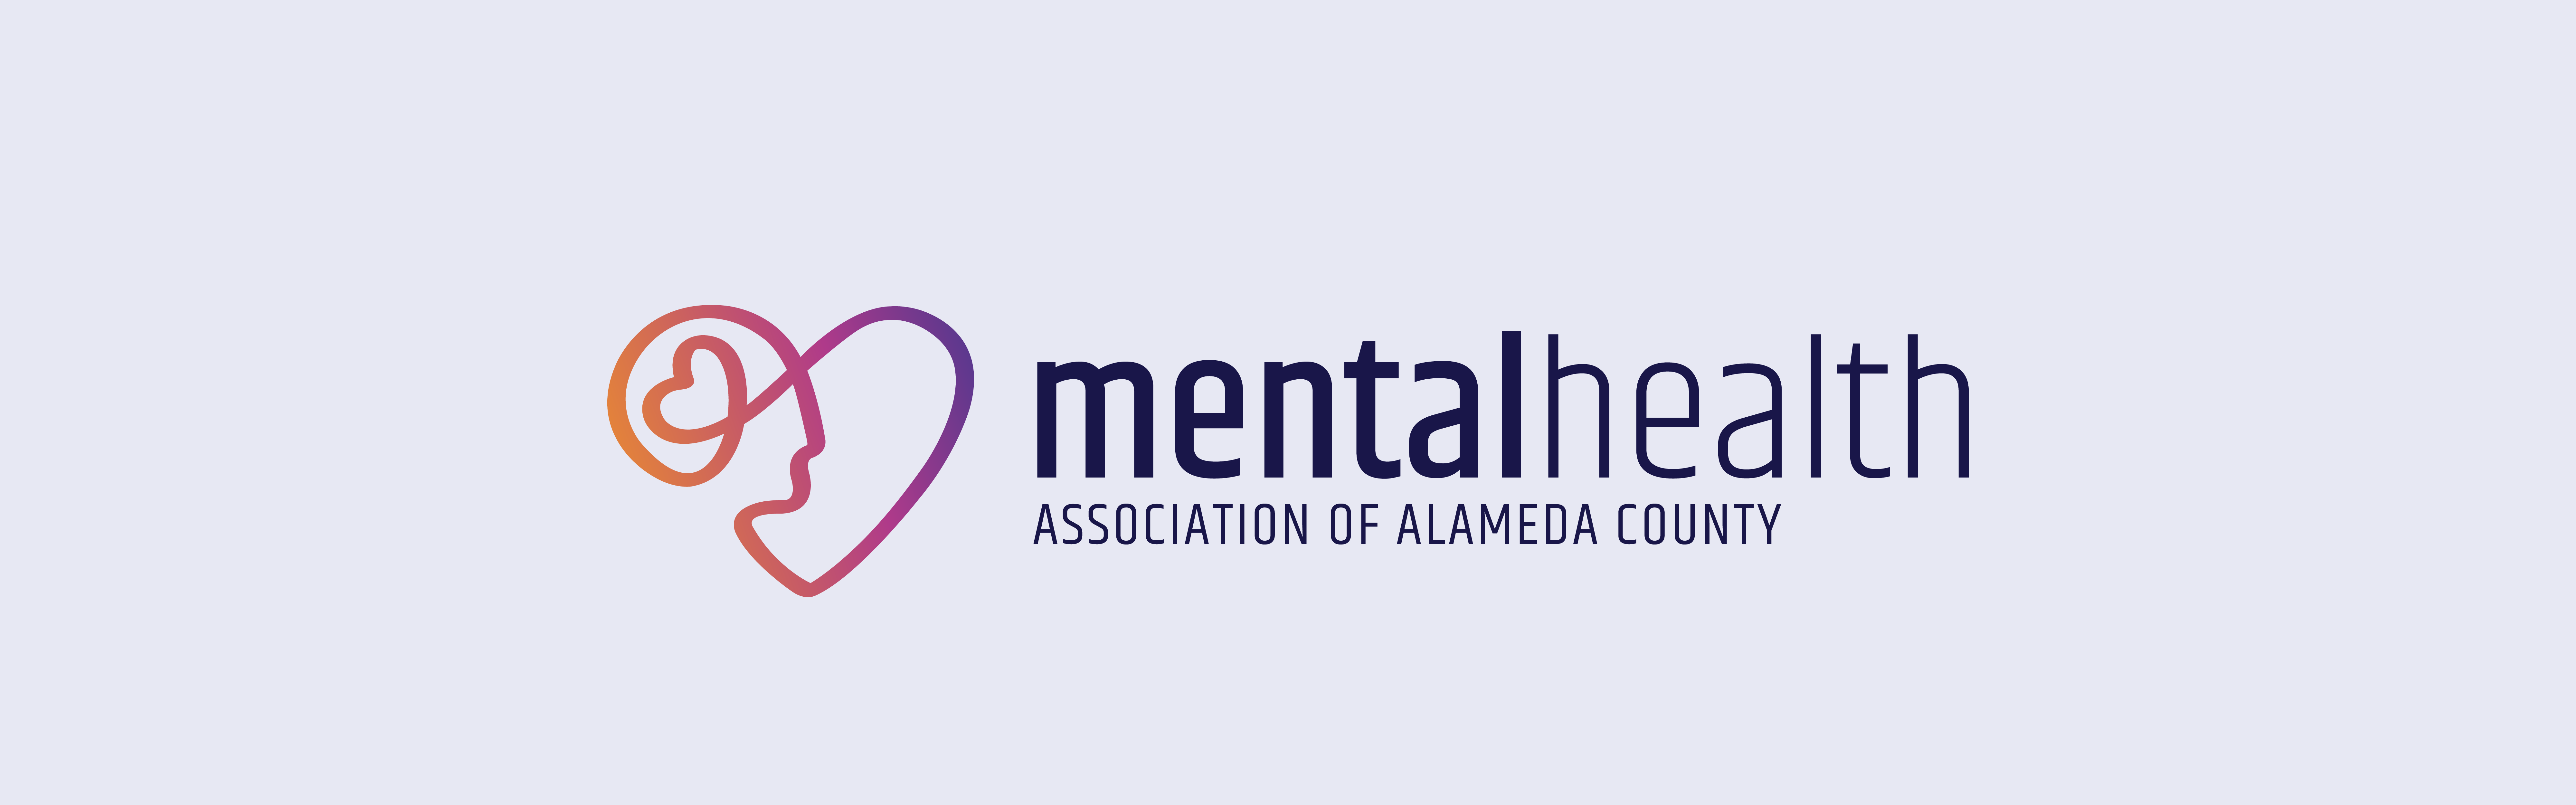 The image showcases the logo of the Mental Health Association of Alameda County, featuring a stylized heart and a brain intertwined, next to the association's name in a clean sans-serif font.